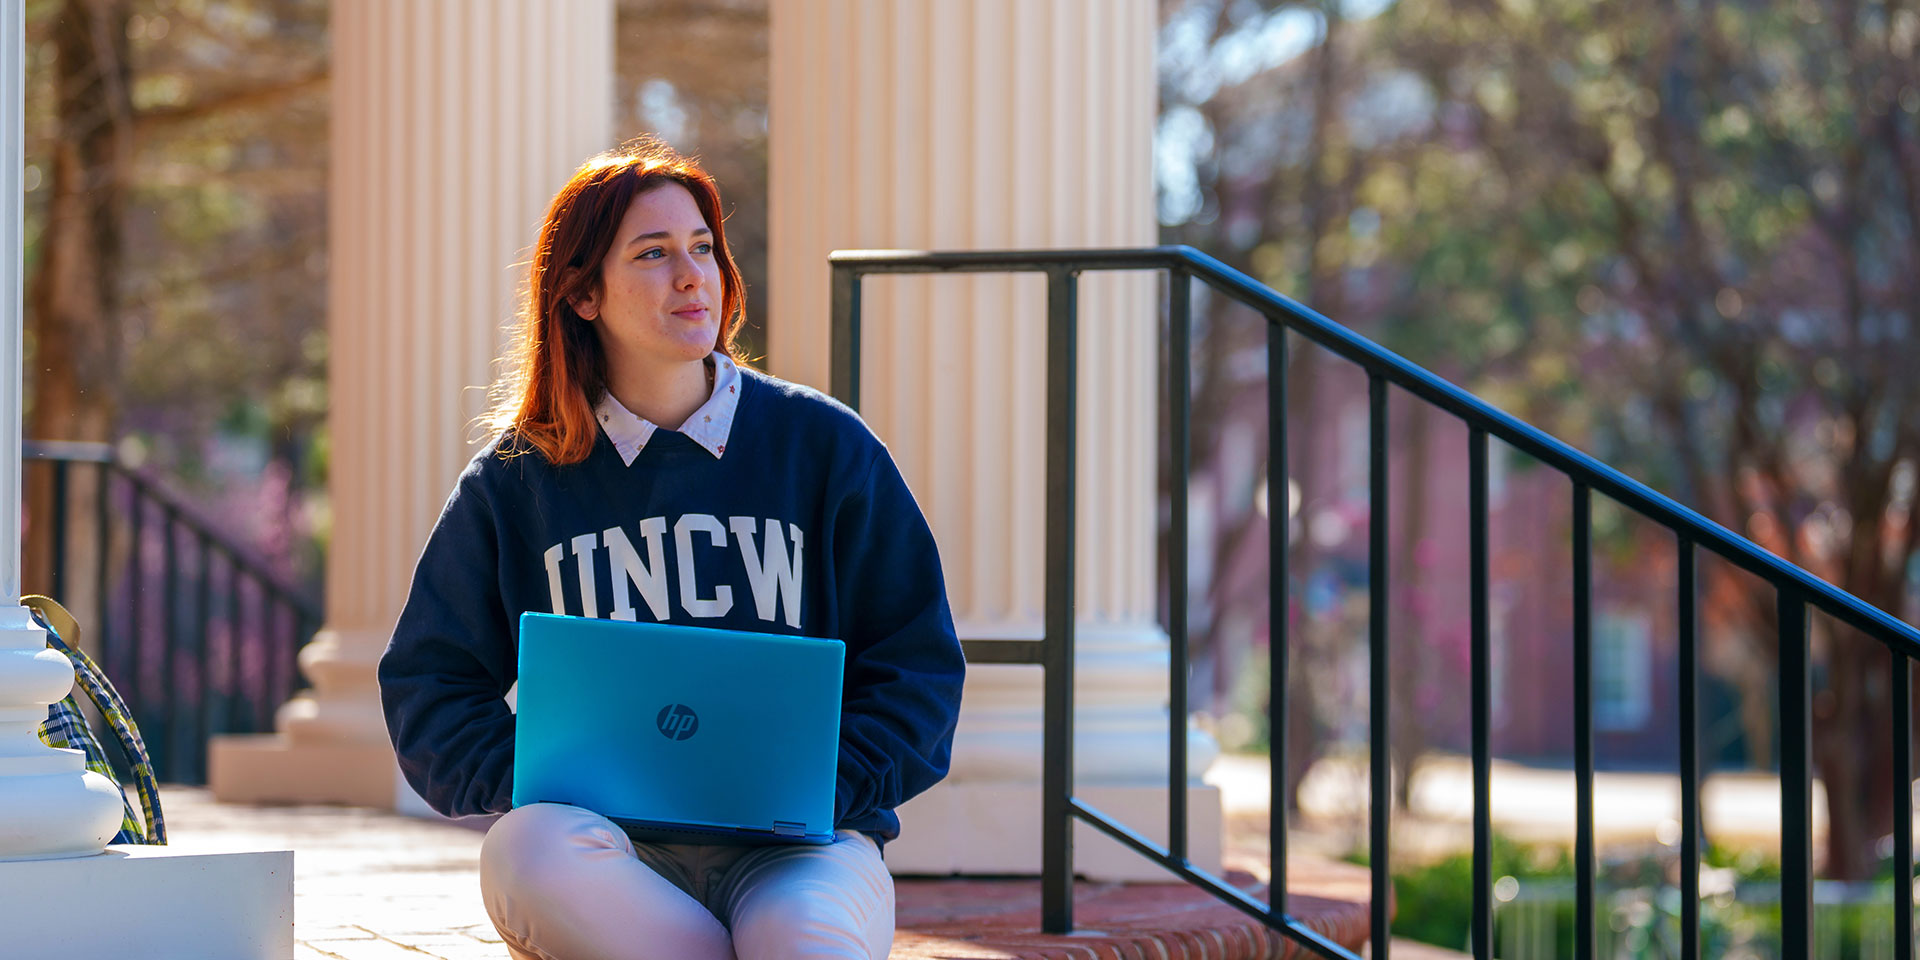 A student sits on steps in a UNCW sweatshirt